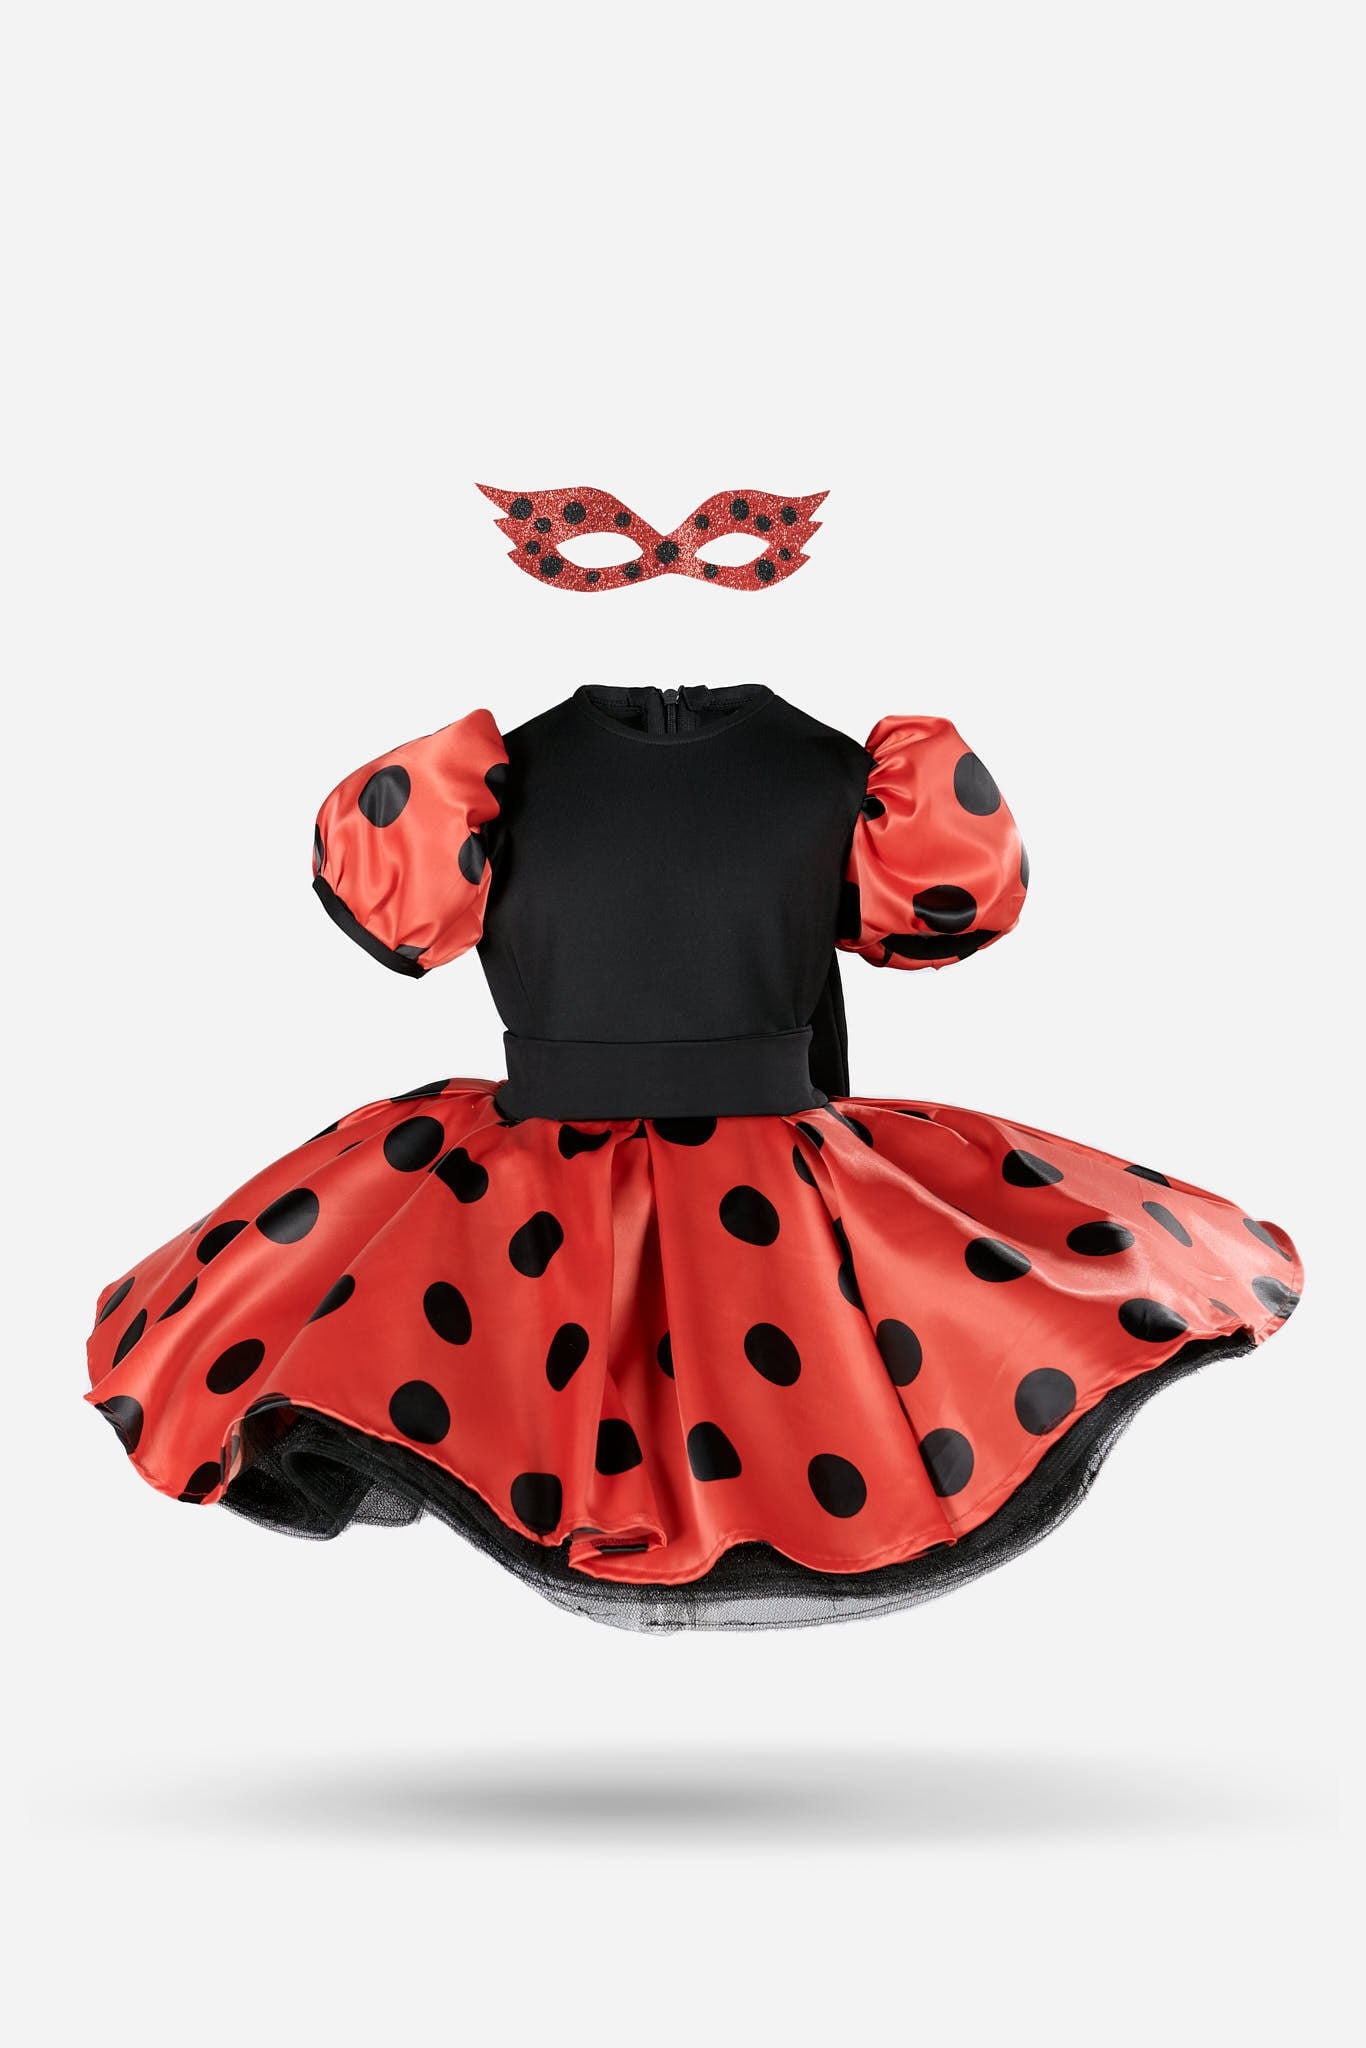 Ladybug Inspired Girl Costume, Lady Bug Inspired Costume, Girl Birthday Dress, Toddler Bithday Costume, Infant Party Gown, Cosplay Party